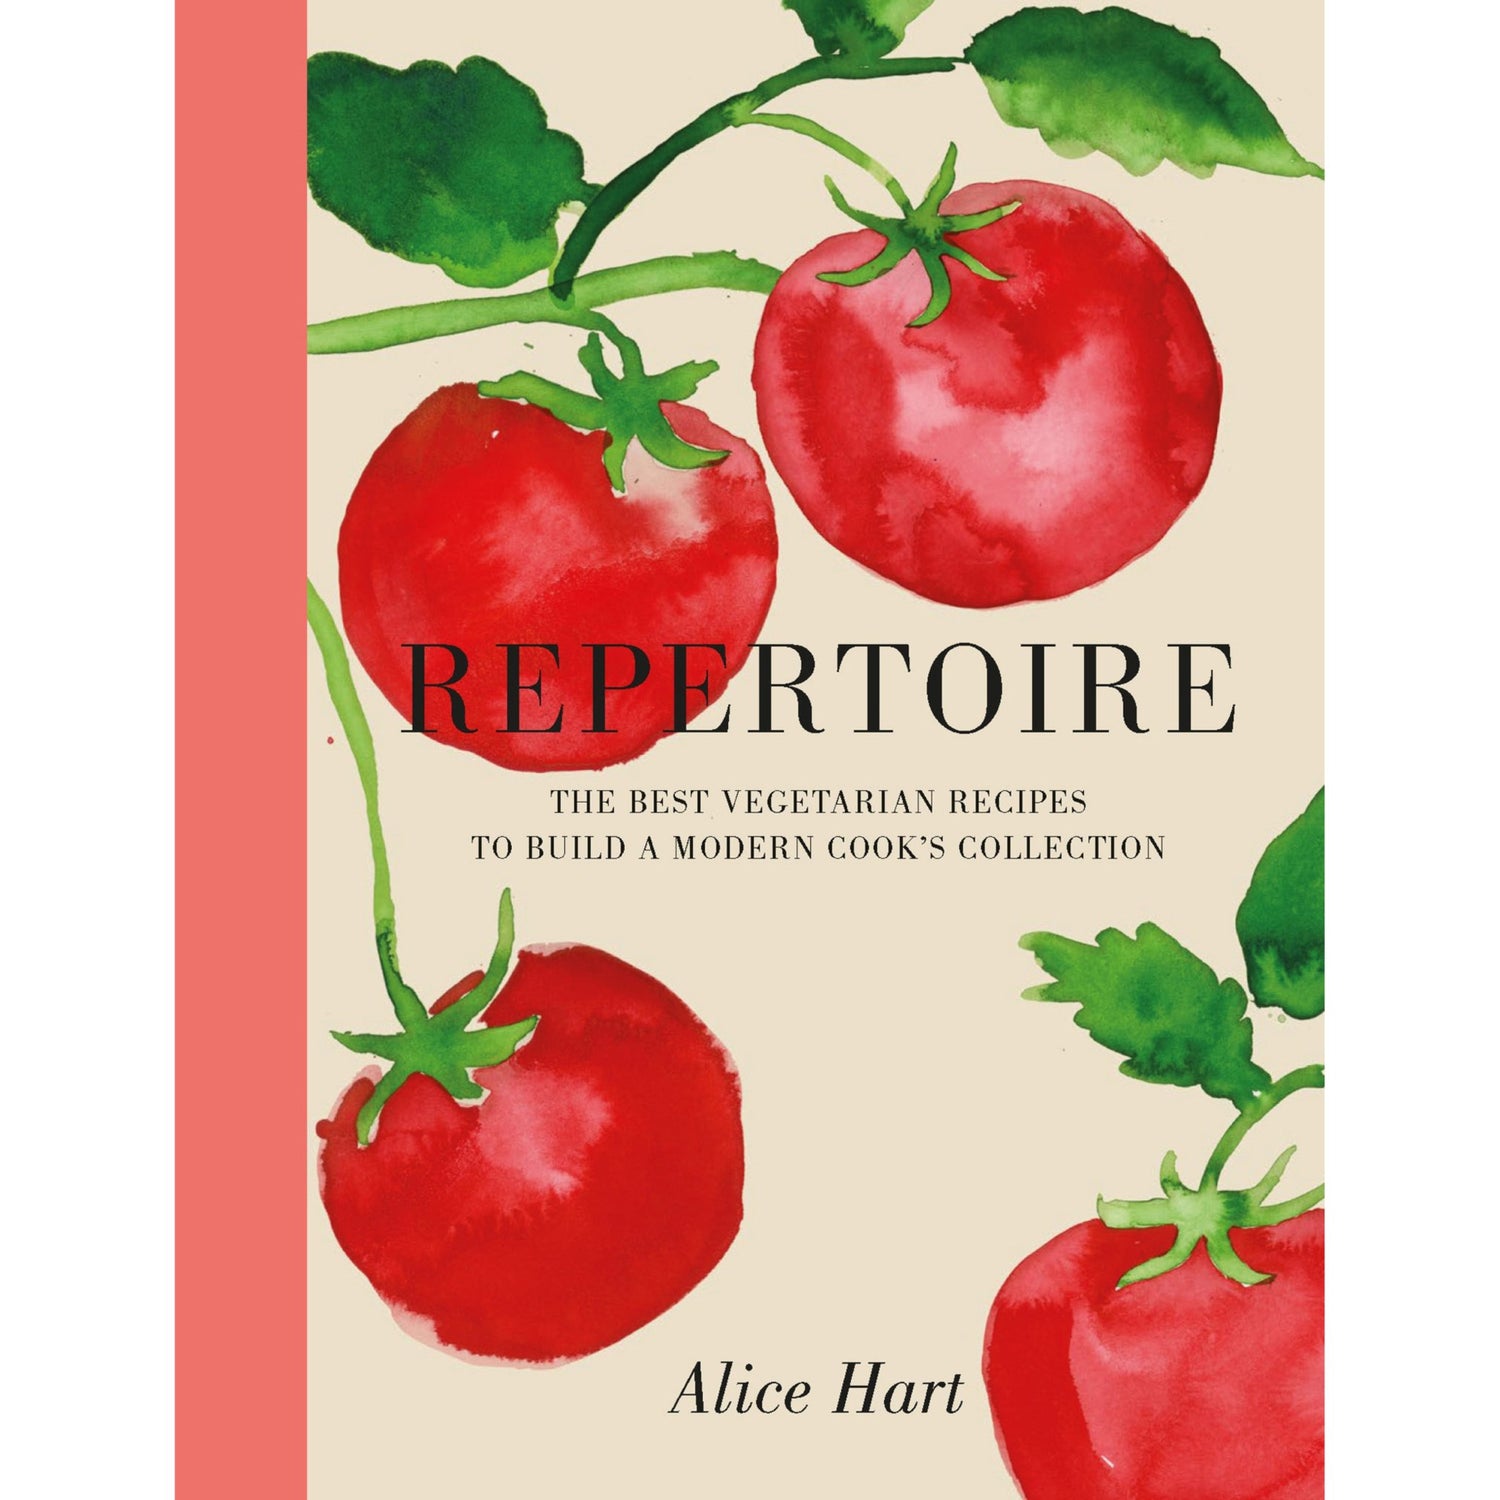 Repertoire - The Best Vegetarian Recipes - The Flower Crate